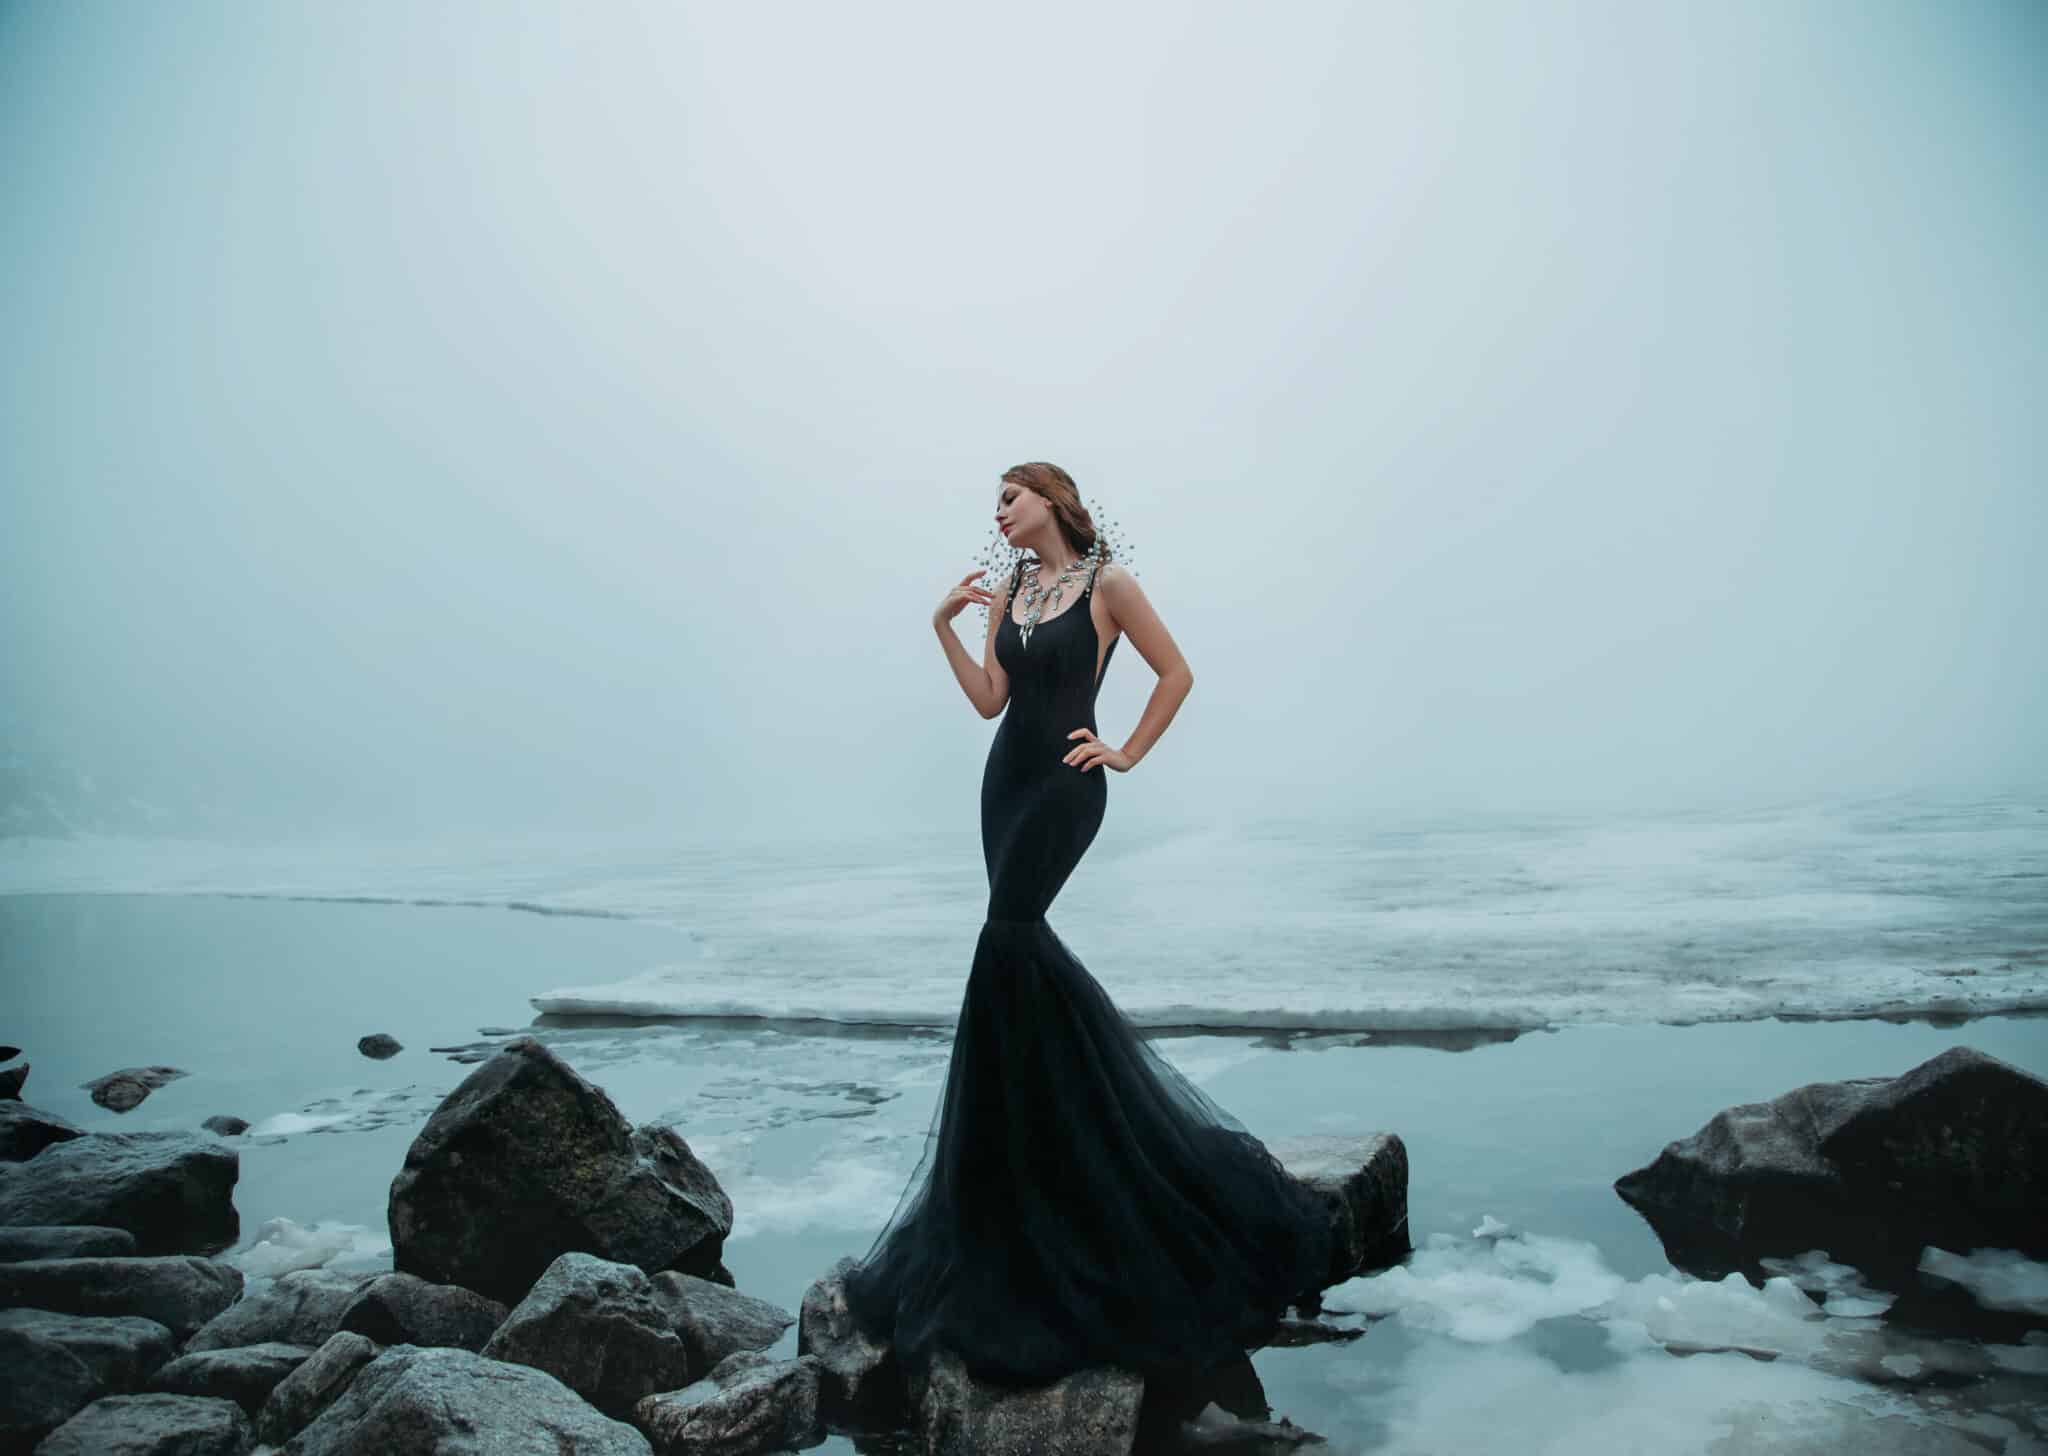 Sexy Woman long black dress silhouette mermaid tail fish. background river ice water stones cold snow.